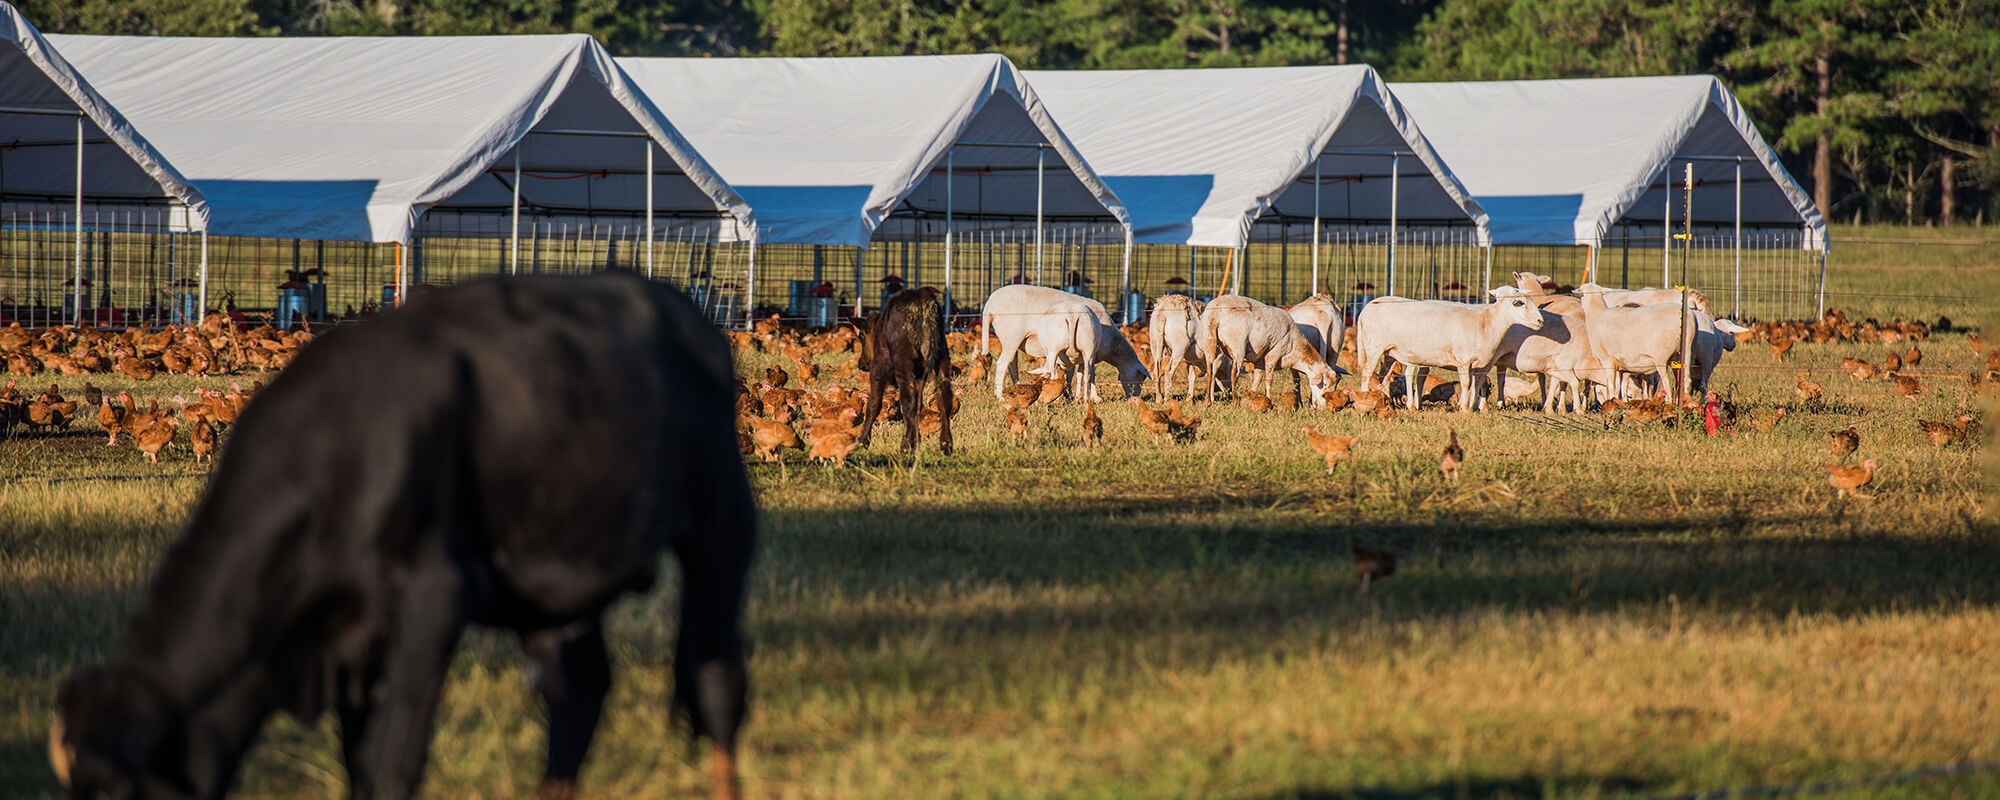 White Oak Pastures: How a 156-year-old farm practices “radically traditional farming”